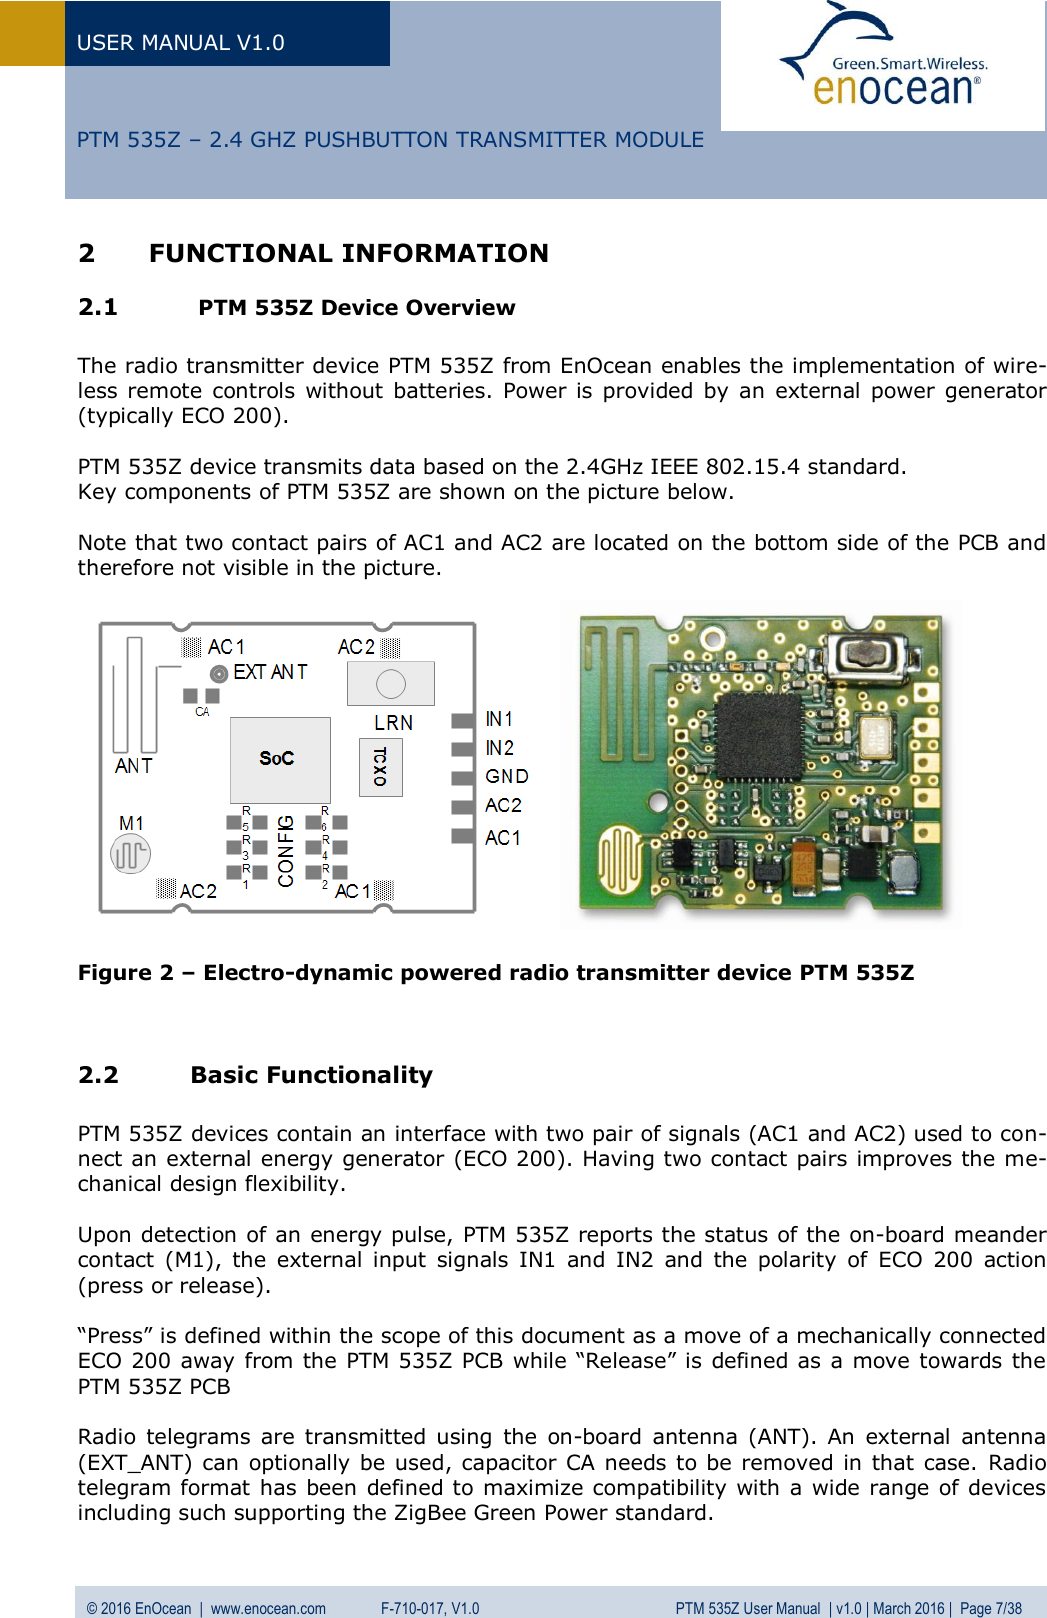 USER MANUAL V1.0   © 2016 EnOcean  |  www.enocean.com   F-710-017, V1.0          PTM 535Z User Manual  | v1.0 | March 2016 |  Page 7/38   PTM 535Z – 2.4 GHZ PUSHBUTTON TRANSMITTER MODULE 2 FUNCTIONAL INFORMATION 2.1  PTM 535Z Device Overview  The radio transmitter device PTM 535Z from EnOcean enables the implementation of wire-less remote  controls  without batteries.  Power is provided  by  an external  power generator (typically ECO 200).   PTM 535Z device transmits data based on the 2.4GHz IEEE 802.15.4 standard.  Key components of PTM 535Z are shown on the picture below.   Note that two contact pairs of AC1 and AC2 are located on the bottom side of the PCB and therefore not visible in the picture.                 Figure 2 – Electro-dynamic powered radio transmitter device PTM 535Z   2.2 Basic Functionality  PTM 535Z devices contain an interface with two pair of signals (AC1 and AC2) used to con-nect an external energy generator (ECO 200). Having two contact pairs improves the me-chanical design flexibility.  Upon detection of an energy pulse, PTM 535Z reports the status of the on-board meander contact  (M1),  the  external input  signals  IN1  and  IN2  and  the  polarity  of  ECO  200  action (press or release).   “Press” is defined within the scope of this document as a move of a mechanically connected ECO 200 away from the PTM 535Z PCB while “Release” is defined as a move towards the PTM 535Z PCB  Radio  telegrams  are transmitted using  the  on-board  antenna (ANT).  An  external  antenna (EXT_ANT) can optionally be used, capacitor CA needs to be removed in that case. Radio telegram format has been defined to maximize compatibility with a wide range of devices including such supporting the ZigBee Green Power standard. 